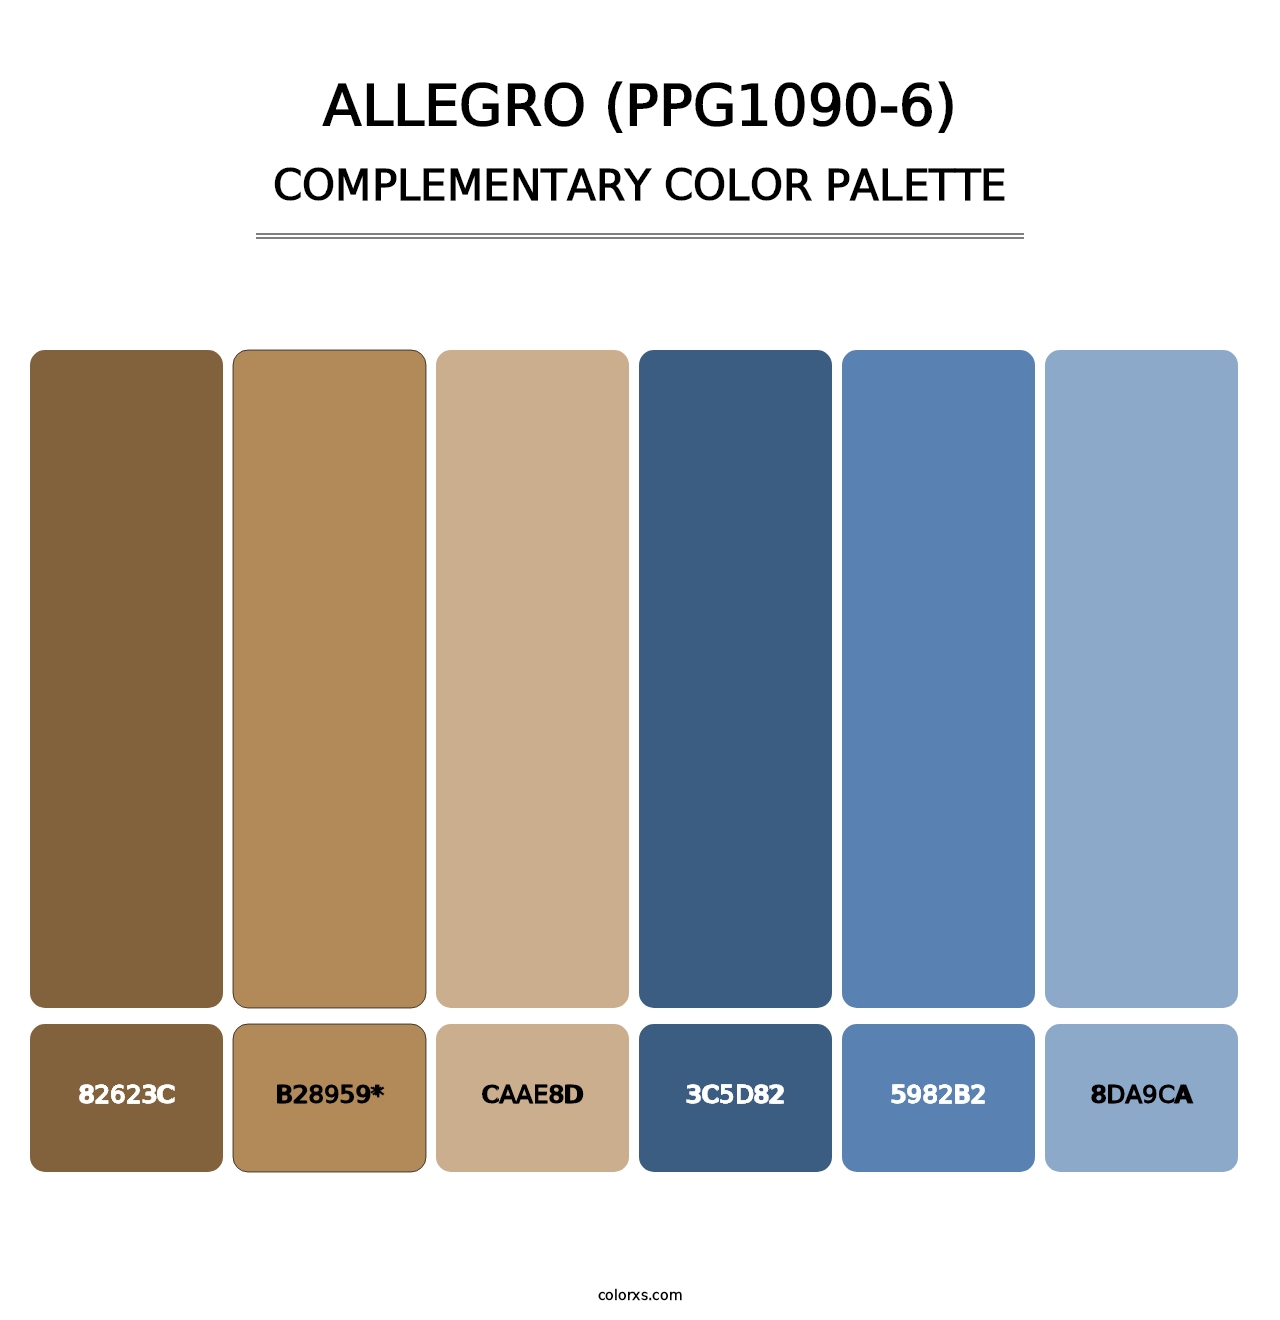 Allegro (PPG1090-6) - Complementary Color Palette